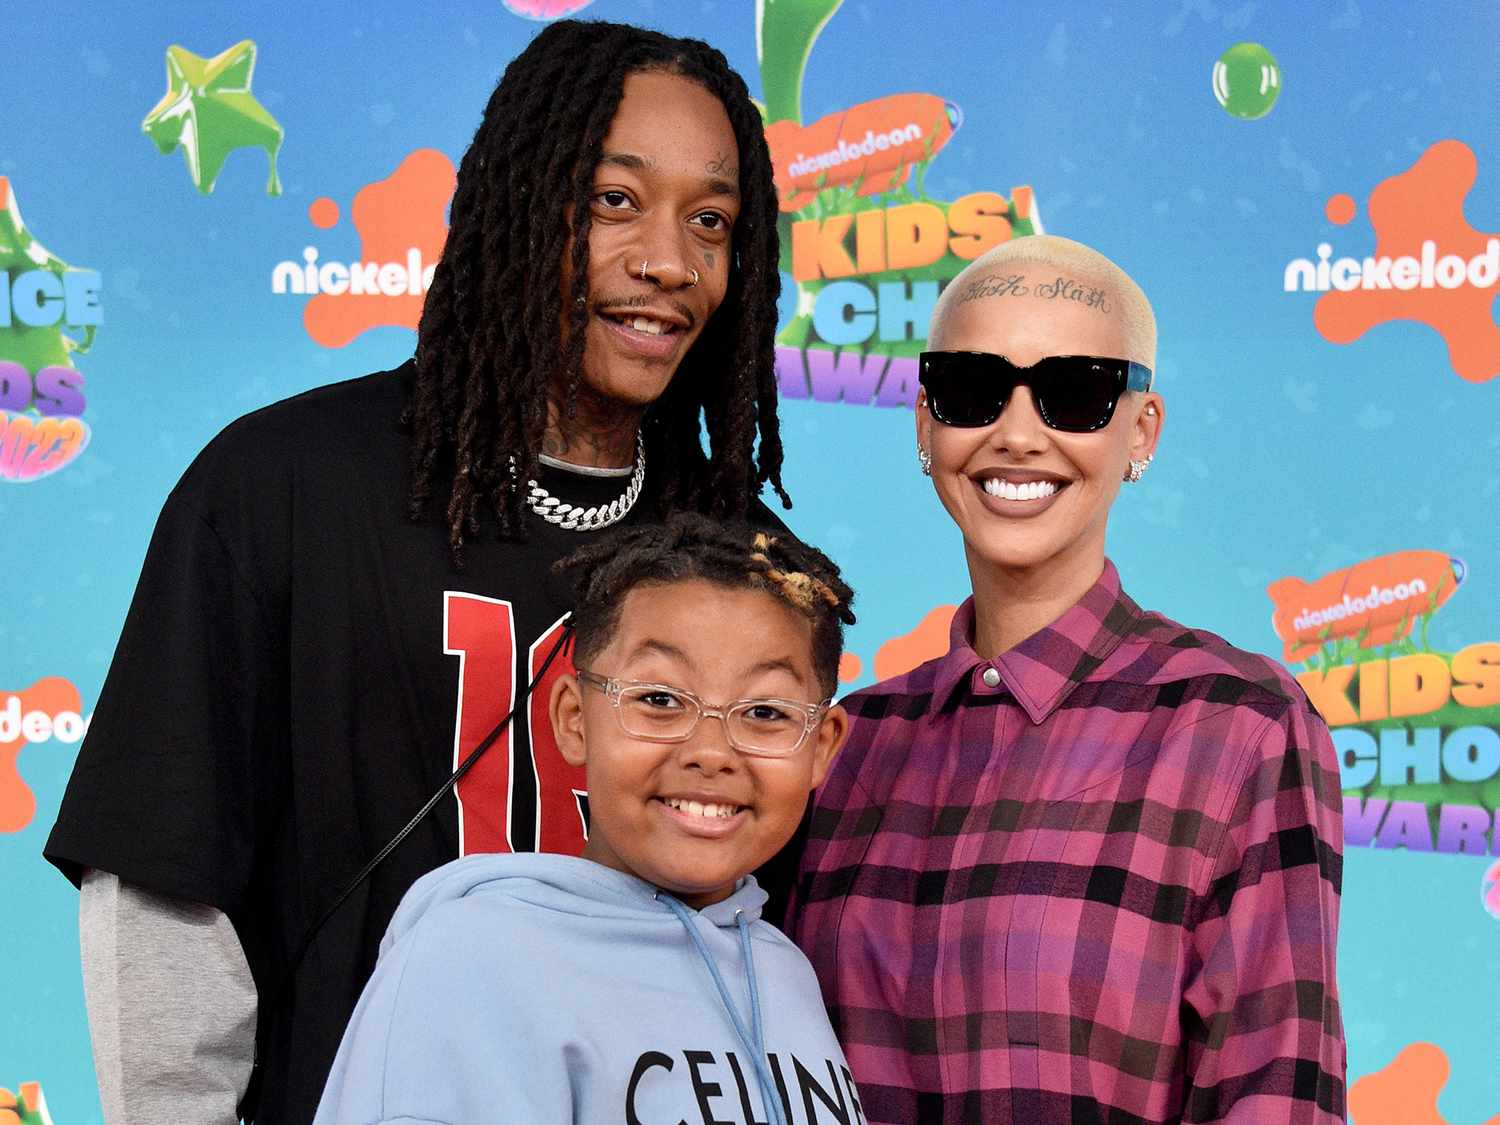 Wiz Khalifa, Sebastian Taylor Thomaz, and Amber Rose attend the 2023 Nickelodeon Kids' Choice Awards on March 04, 2023 in Los Angeles, California